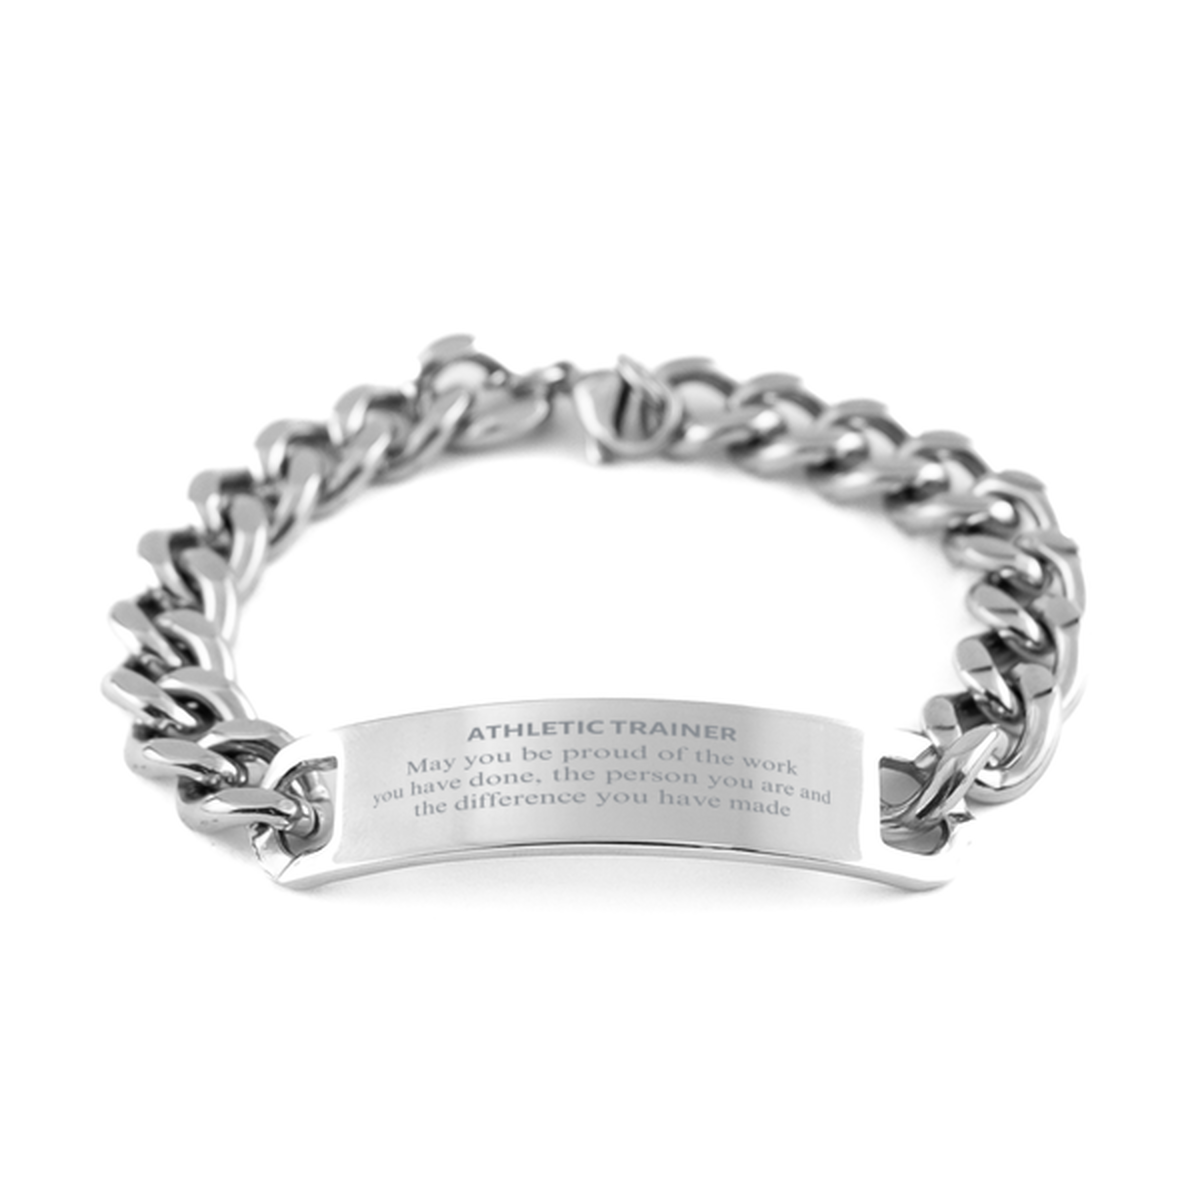 Athletic Trainer May you be proud of the work you have done, Retirement Athletic Trainer Cuban Chain Stainless Steel Bracelet for Colleague Appreciation Gifts Amazing for Athletic Trainer